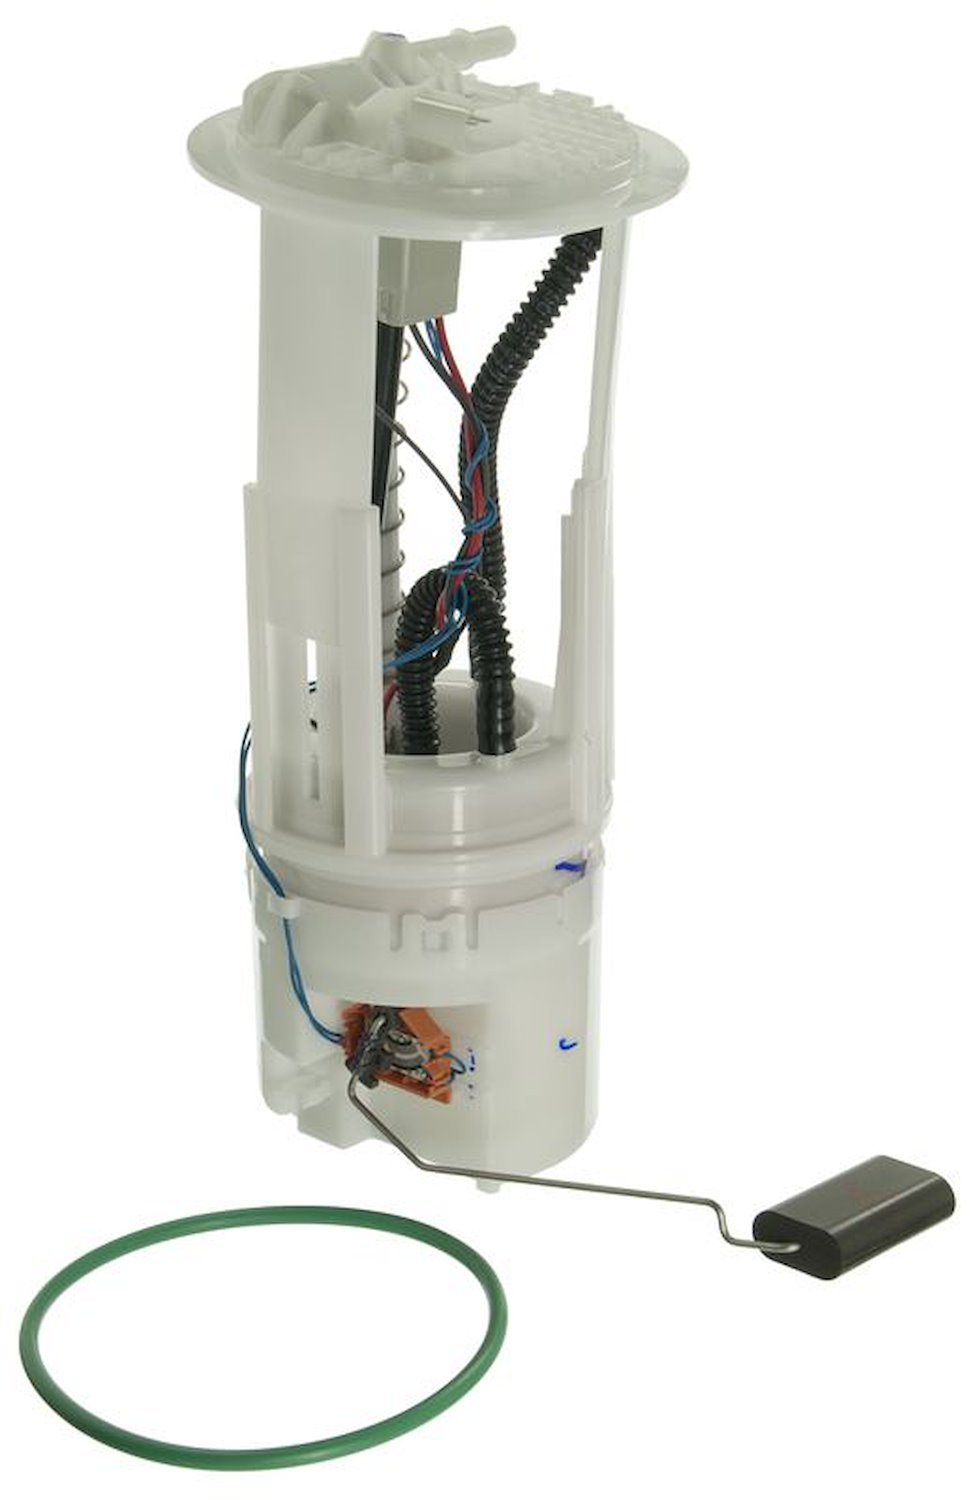 OE Chrysler/Dodge Replacement Fuel Pump Module Assembly 2005-2009